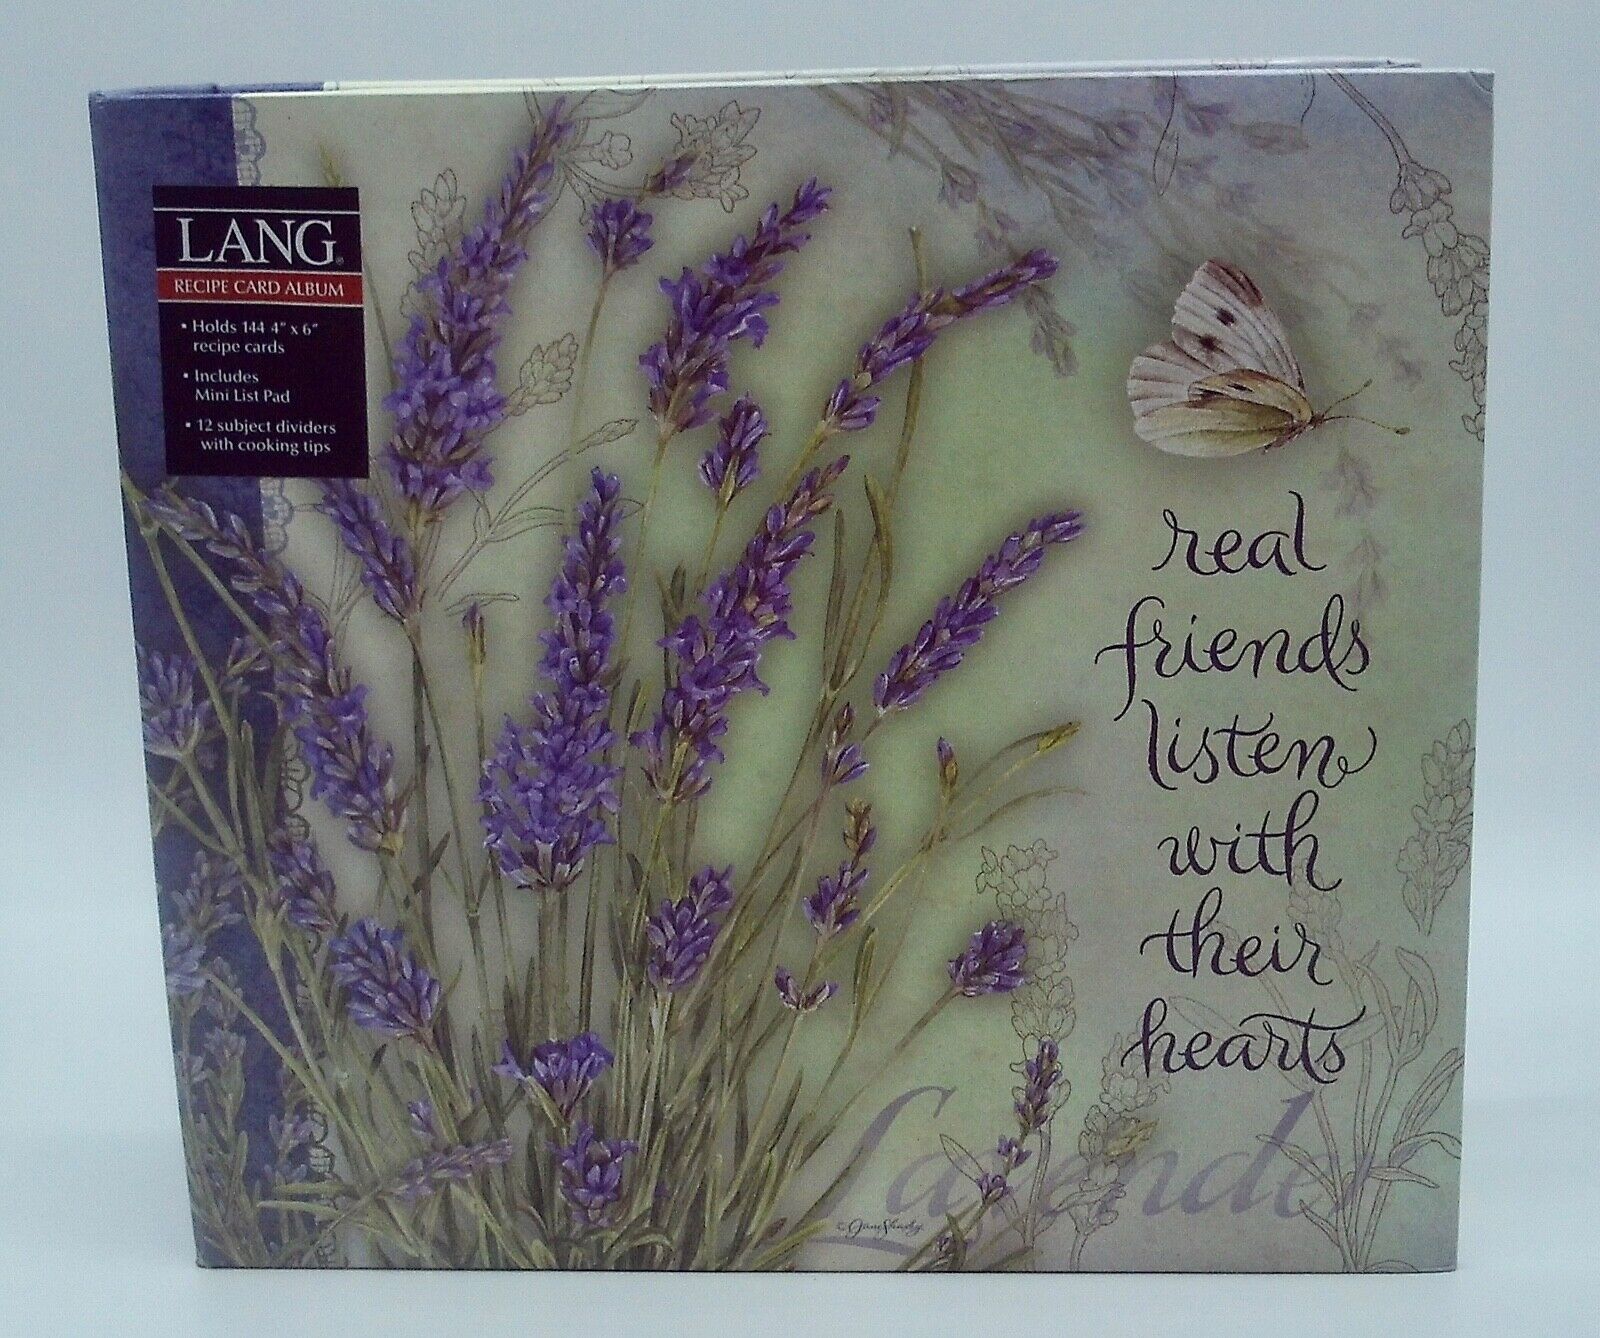 Lang Recipe Card Album - 3 Ring Binder with 12 Subject Dividers - Lavender Theme